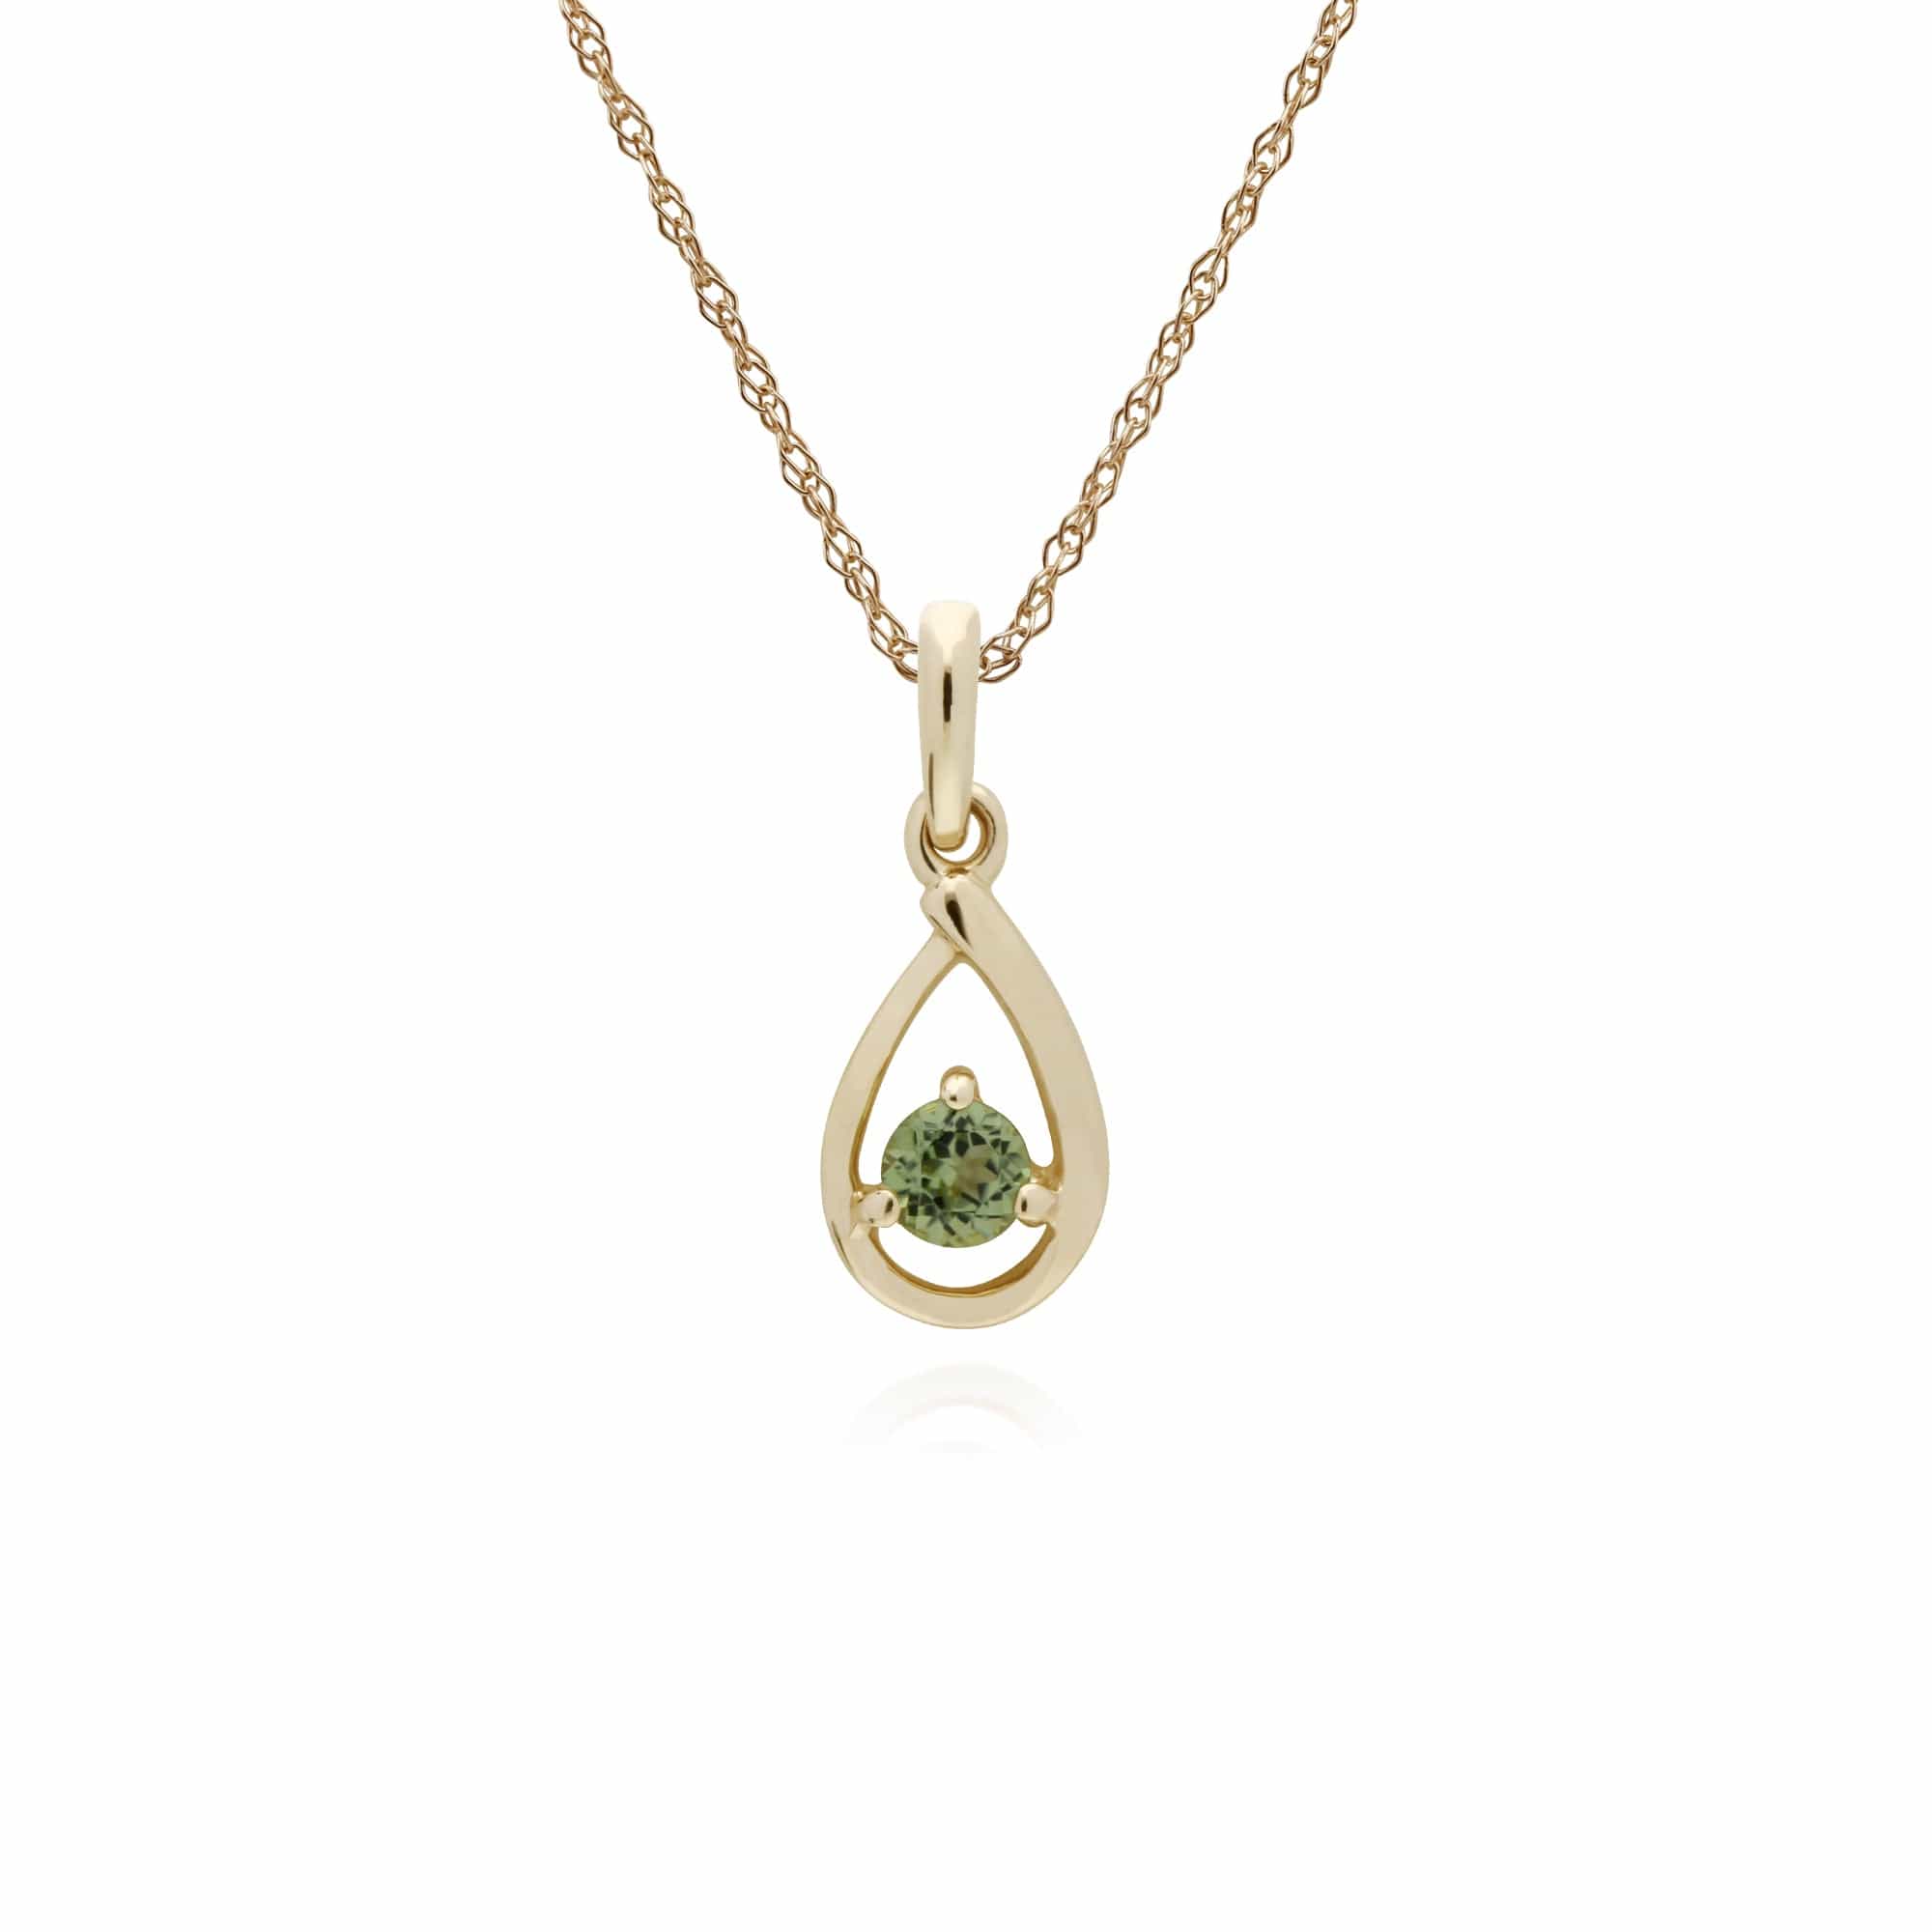 135E1190069-135P1551069 Classic Round Peridot Single Stone Tear Drop Earrings & Necklace Set in 9ct Yellow Gold 3